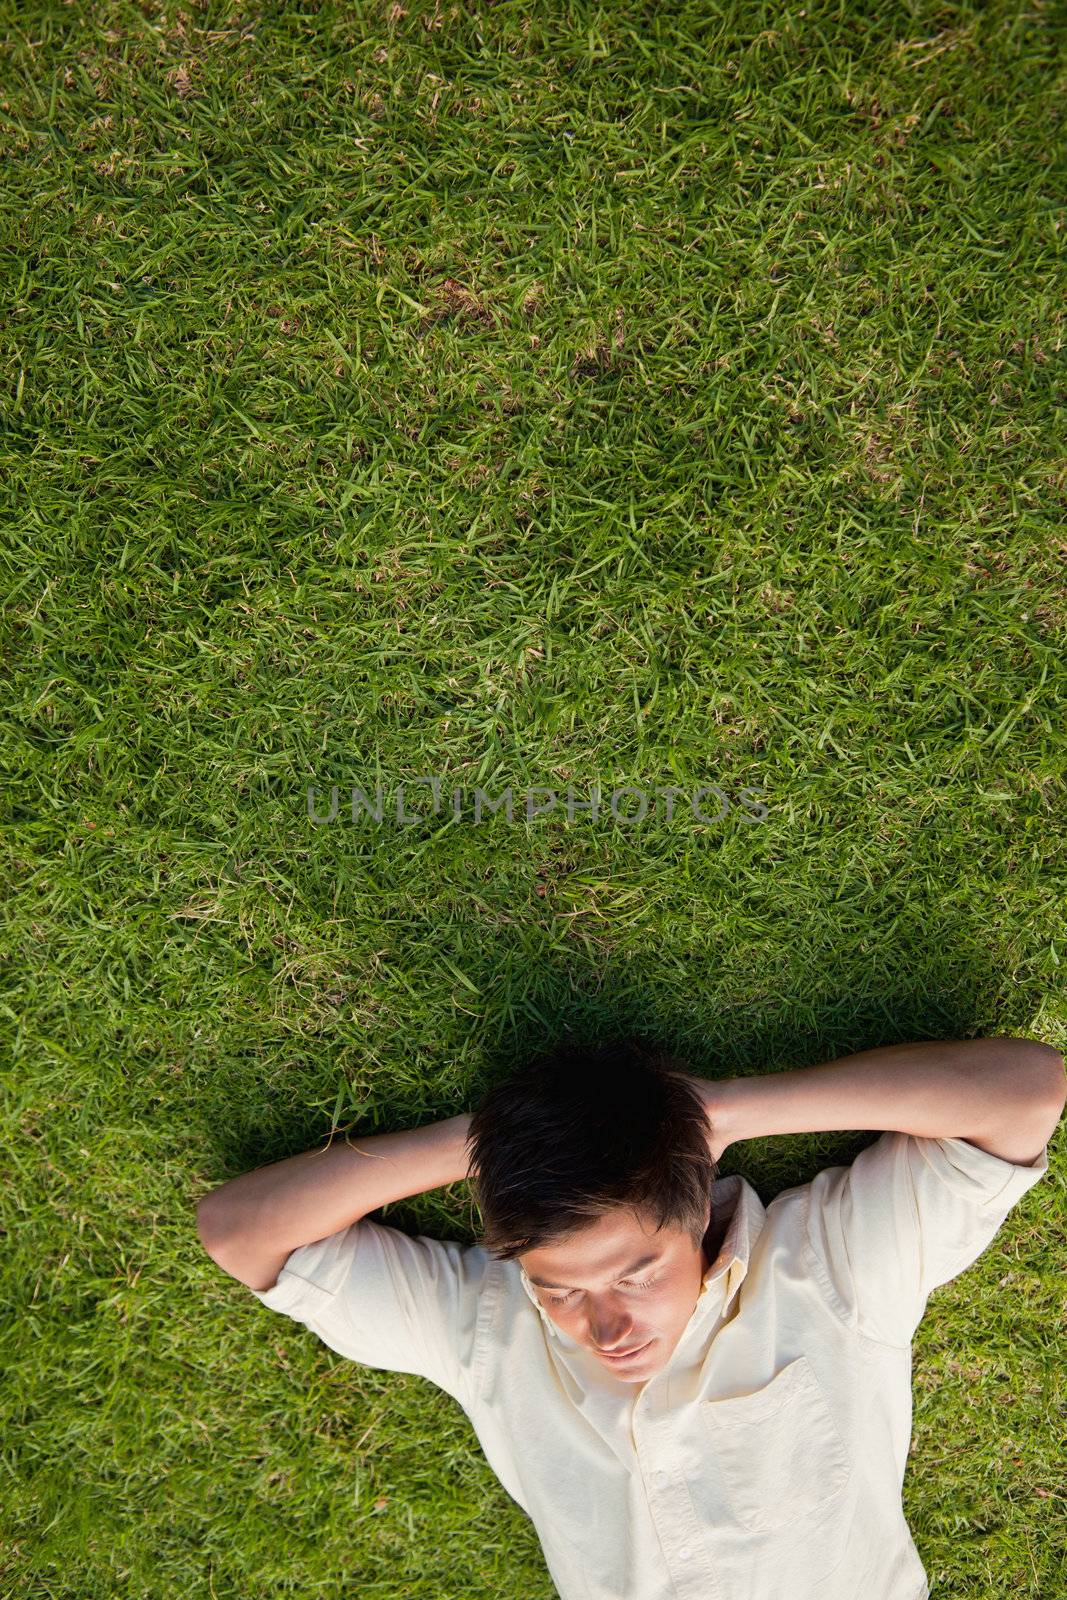 Elevated view of a man lying with his eyes closed and his head r by Wavebreakmedia